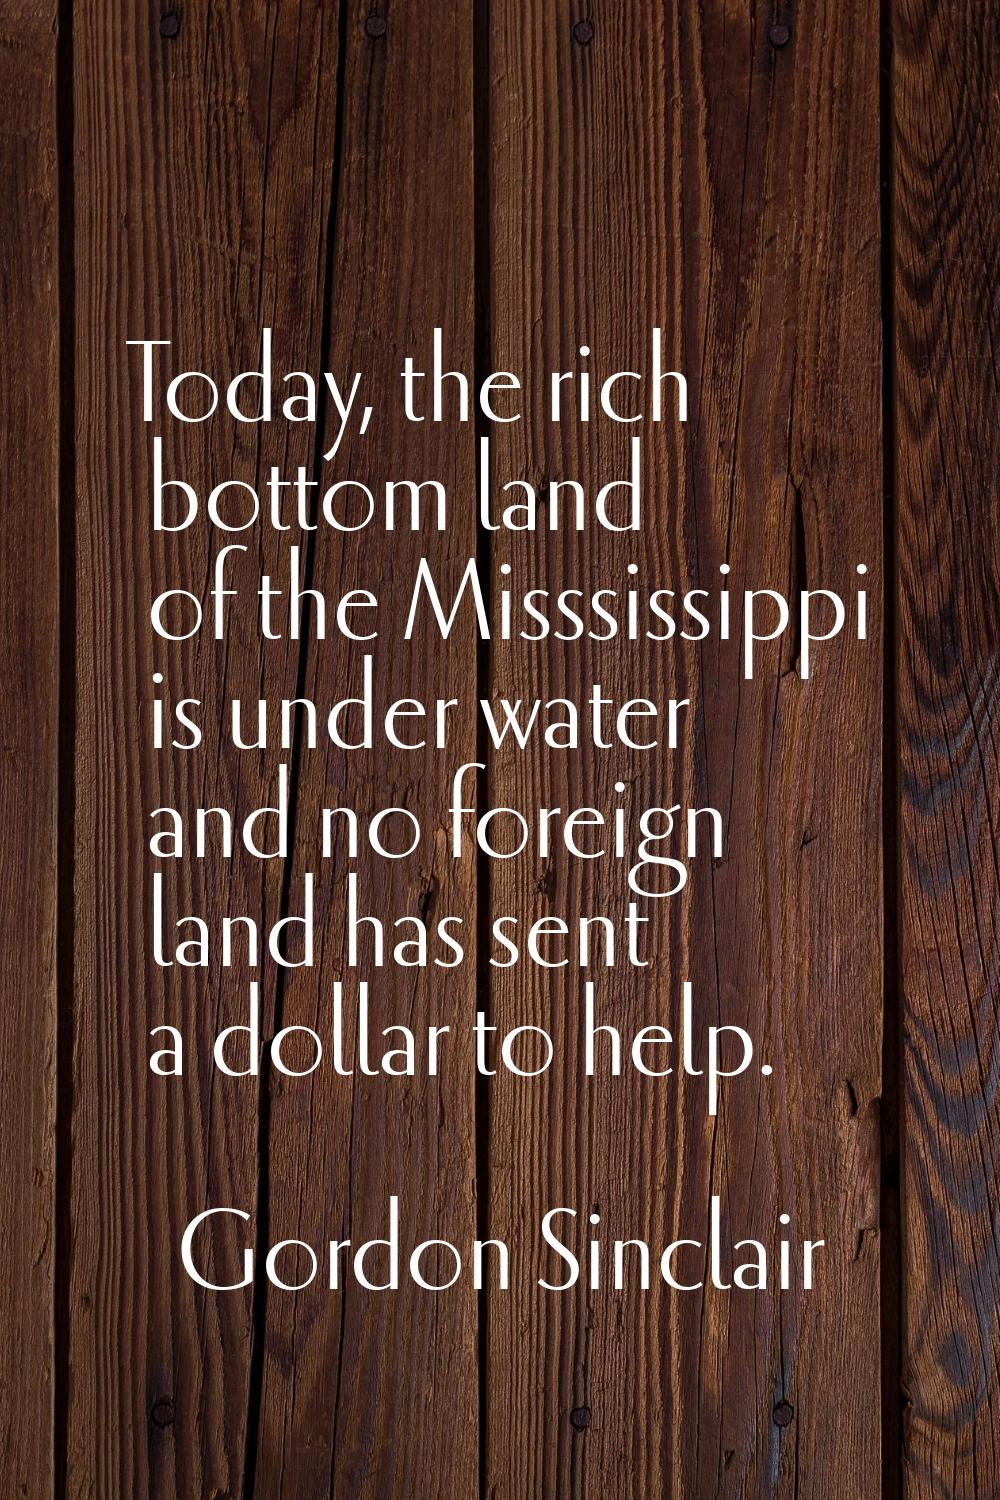 Today, the rich bottom land of the Misssissippi is under water and no foreign land has sent a dolla